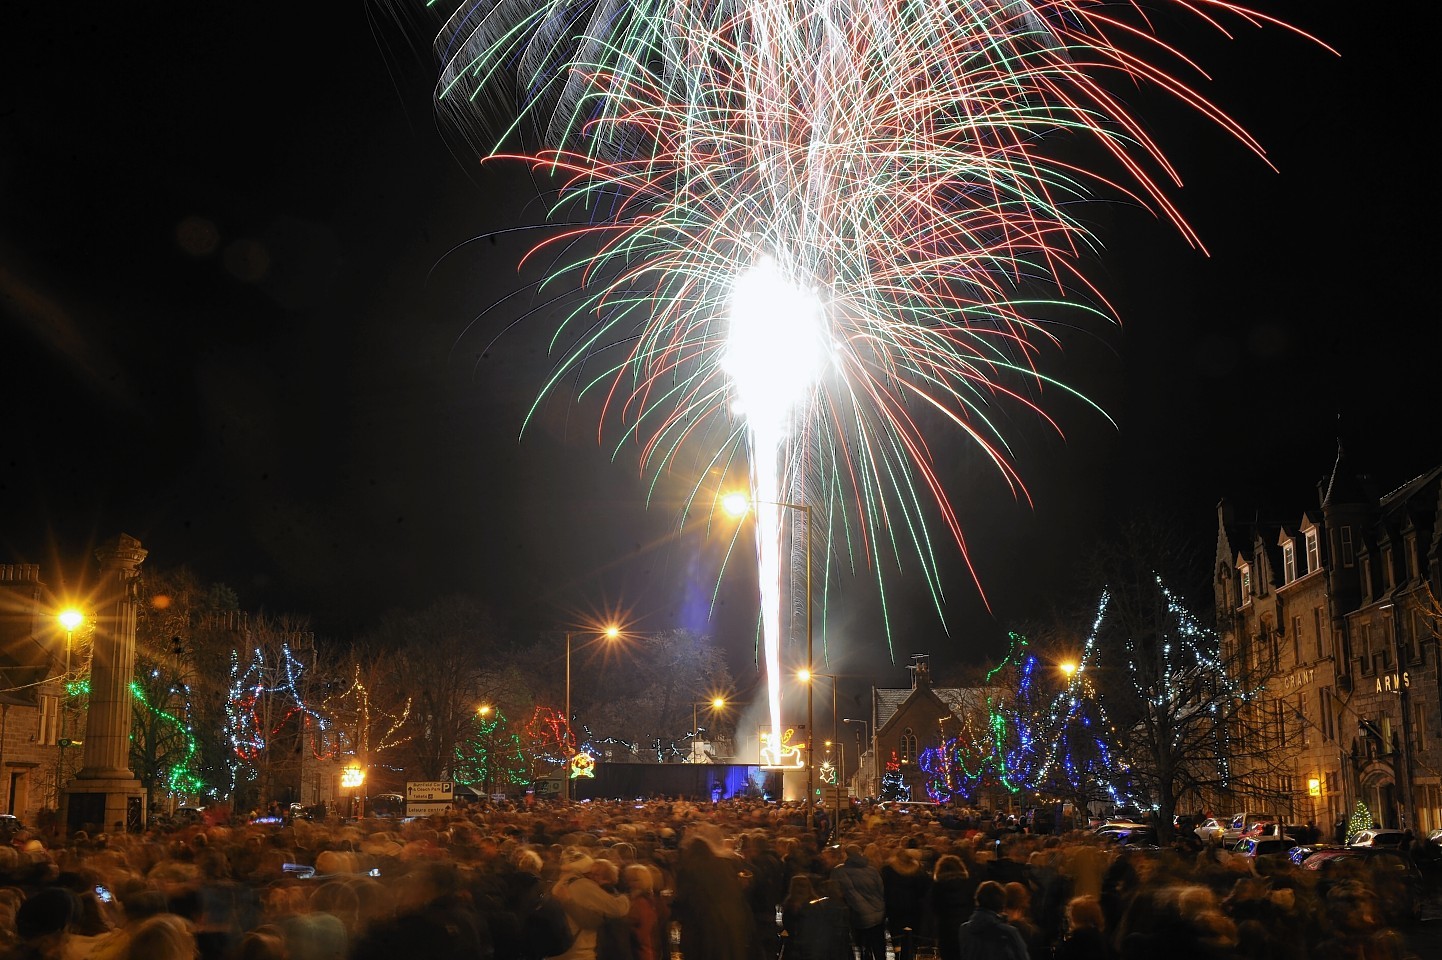 Grantown started 250th anniversary celebrations in style on Hogmanay